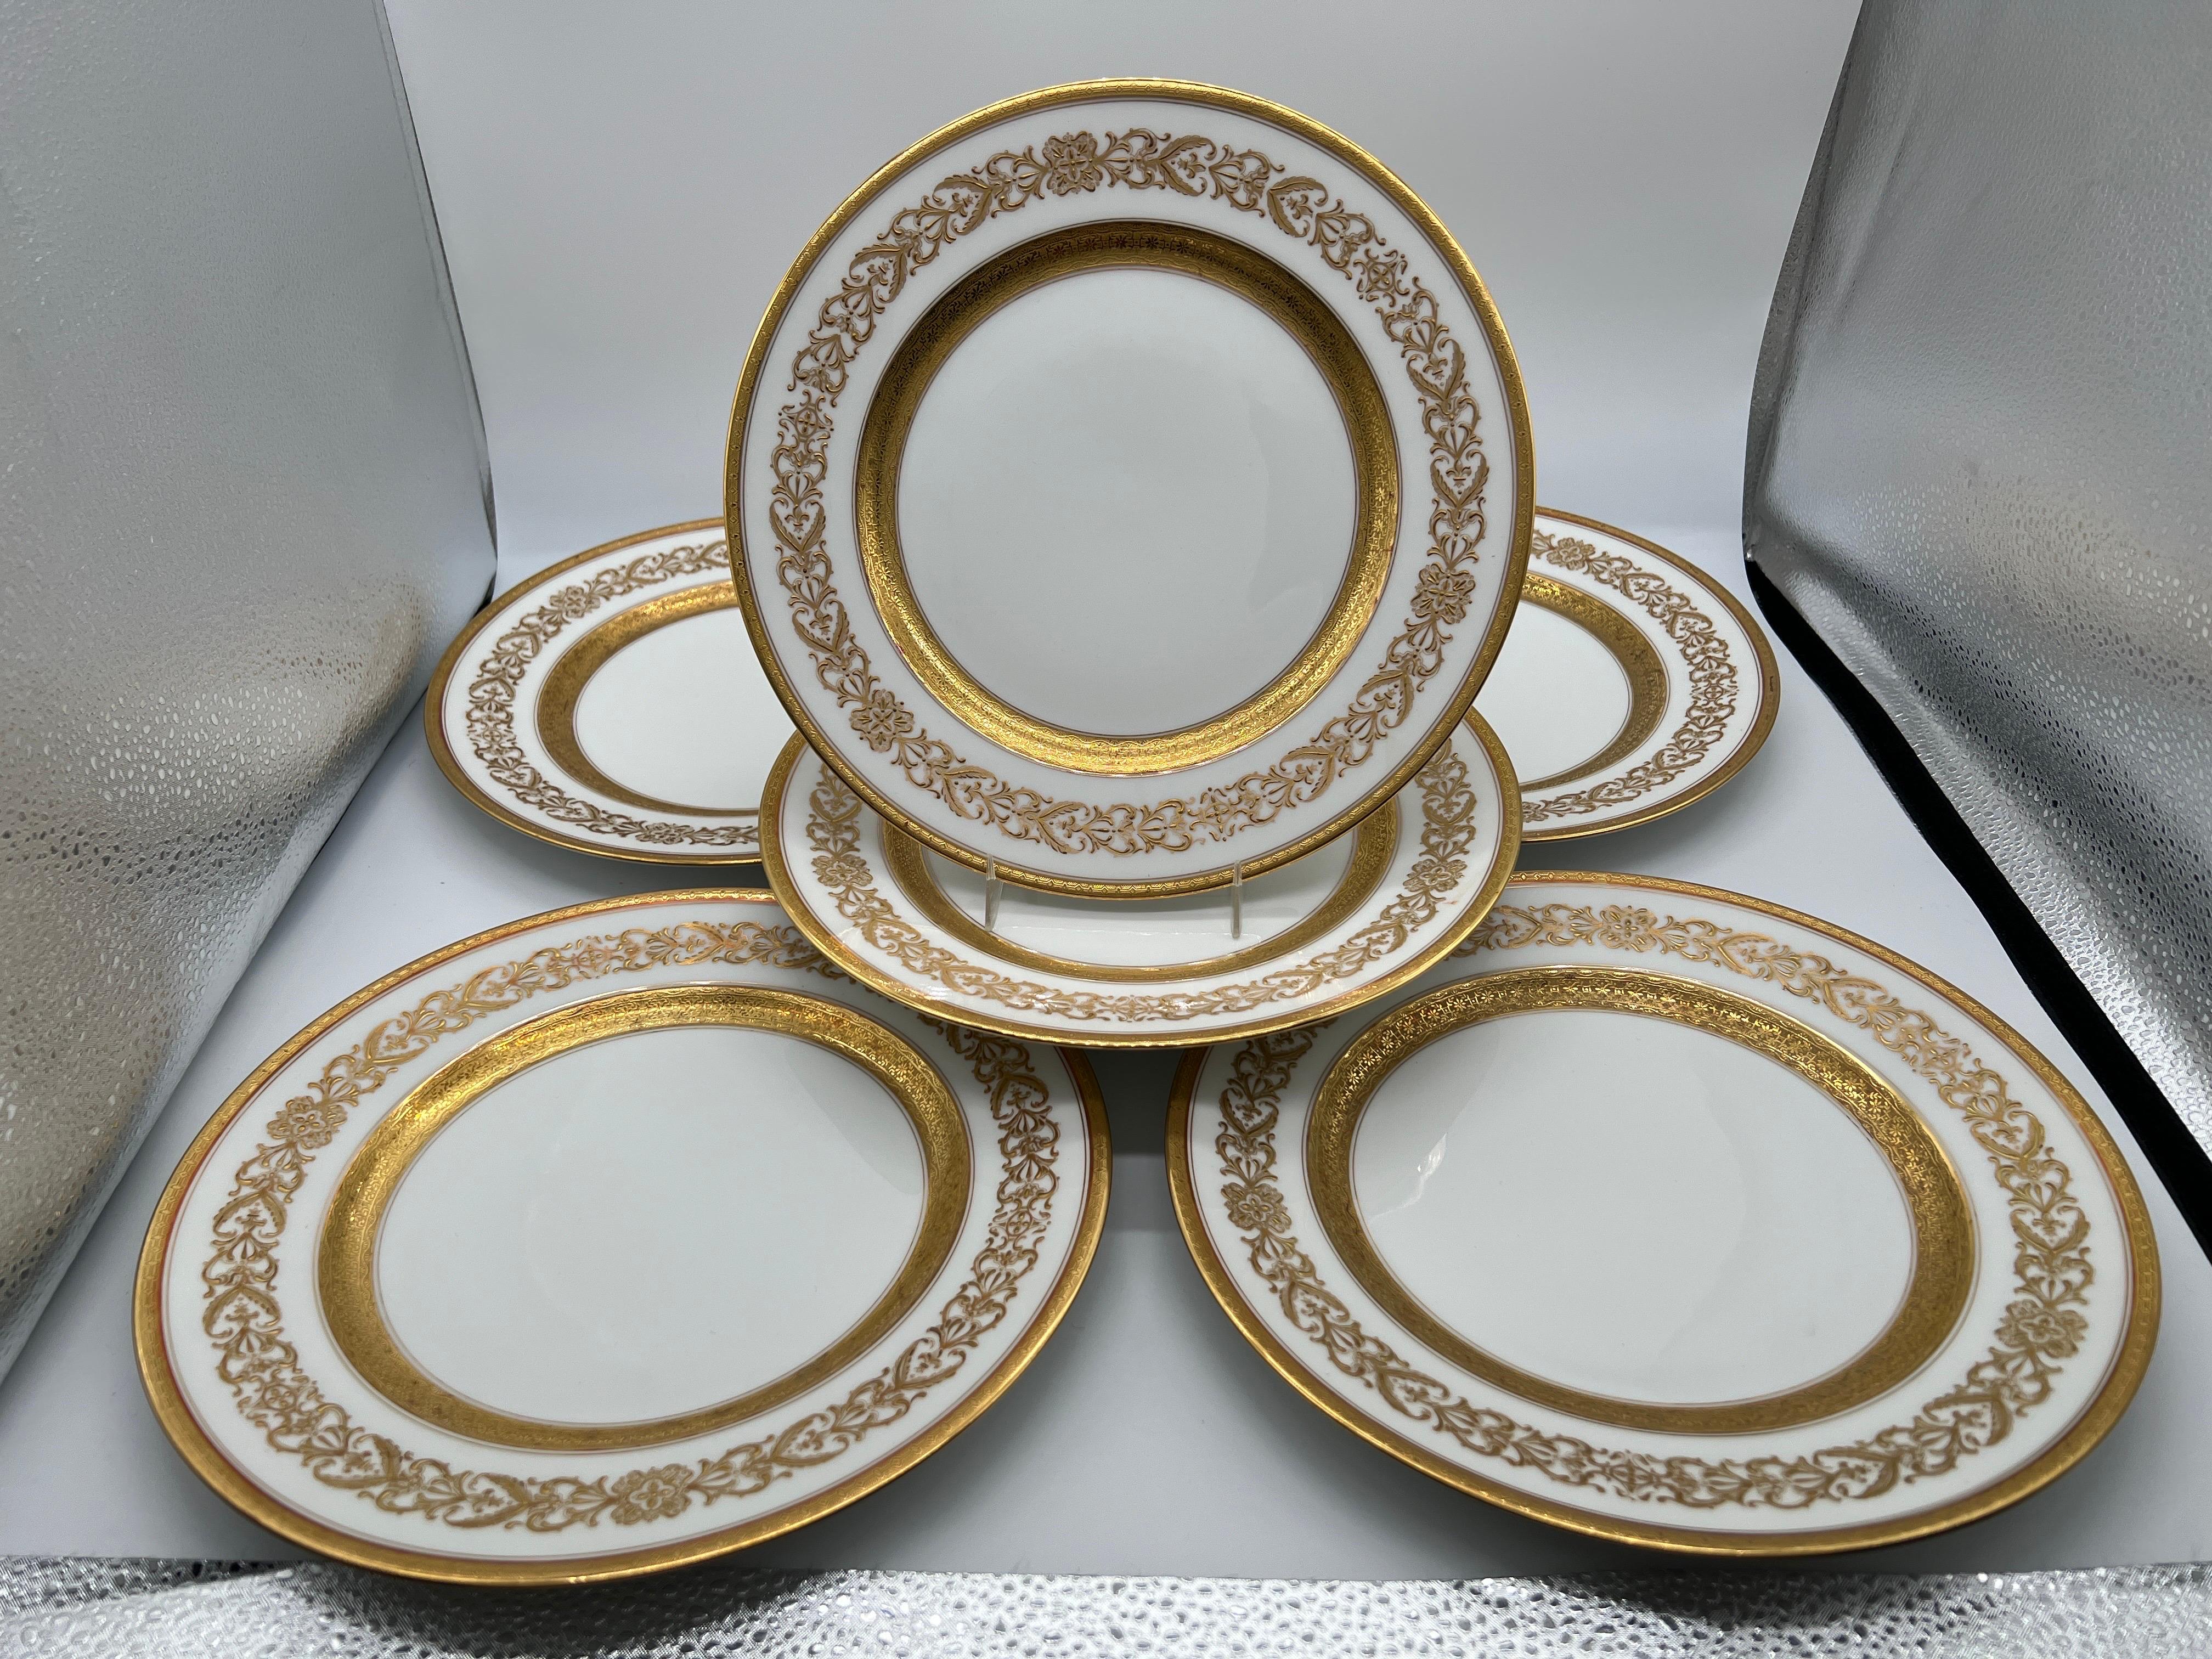 Charles Ahrenfeldt (French Limoges, 1884-1969) for Richard Briggs Company (American, 1798-1946). Mark dates 1894-1930. 

An extremely fine quality set of six (6) porcelain plates heavily decorated with gold leaf across surfaces and a foliate